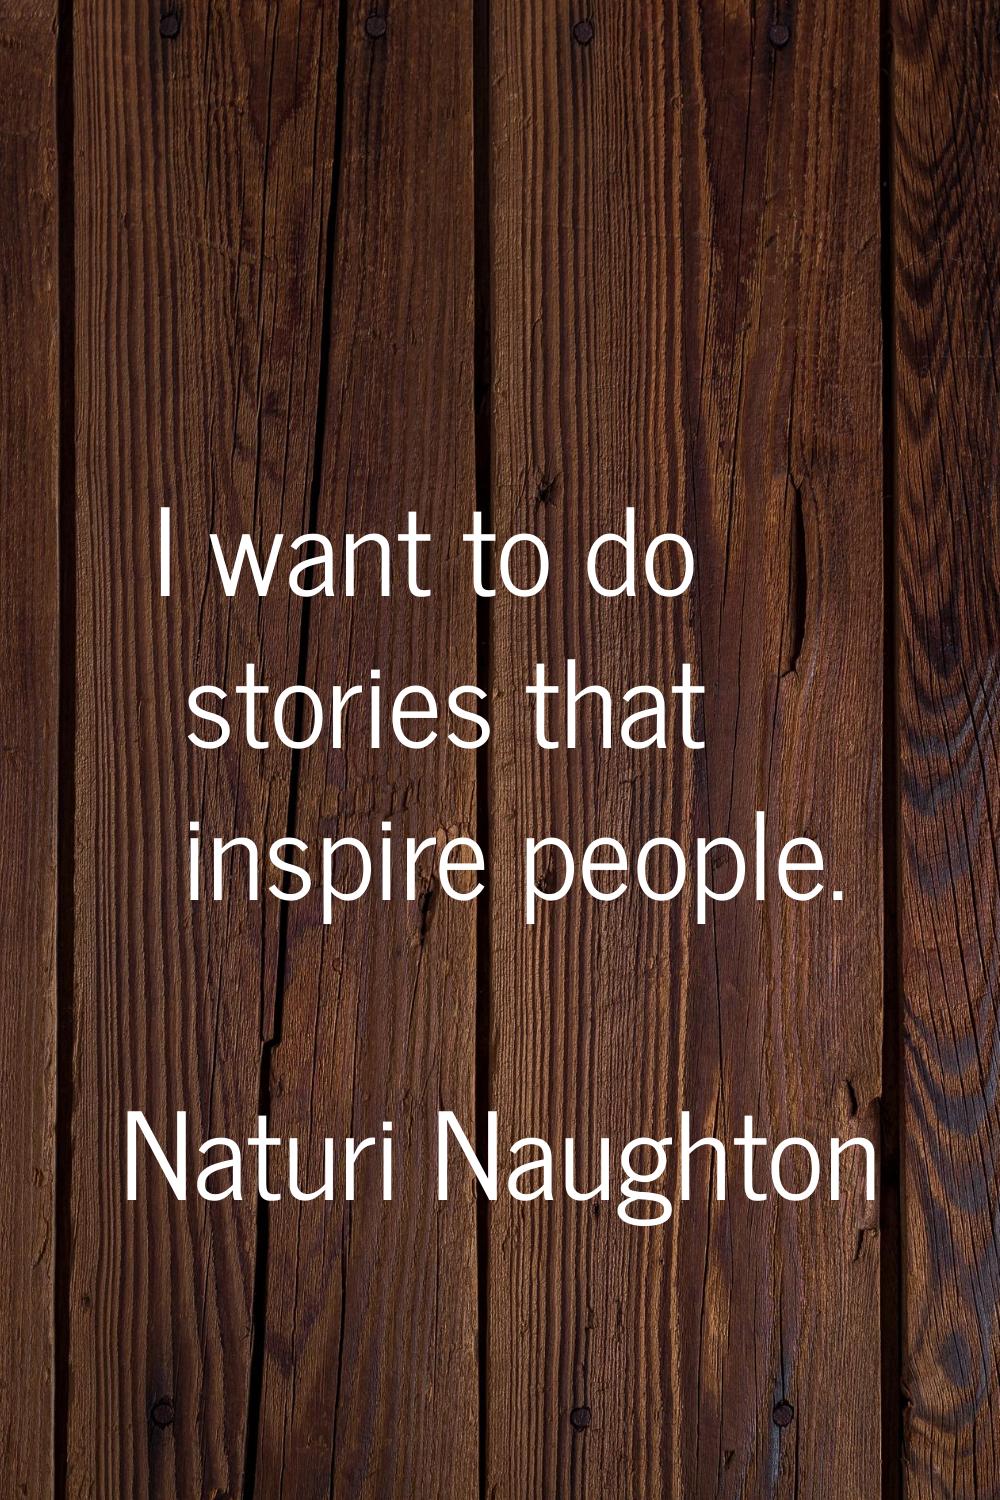 I want to do stories that inspire people.